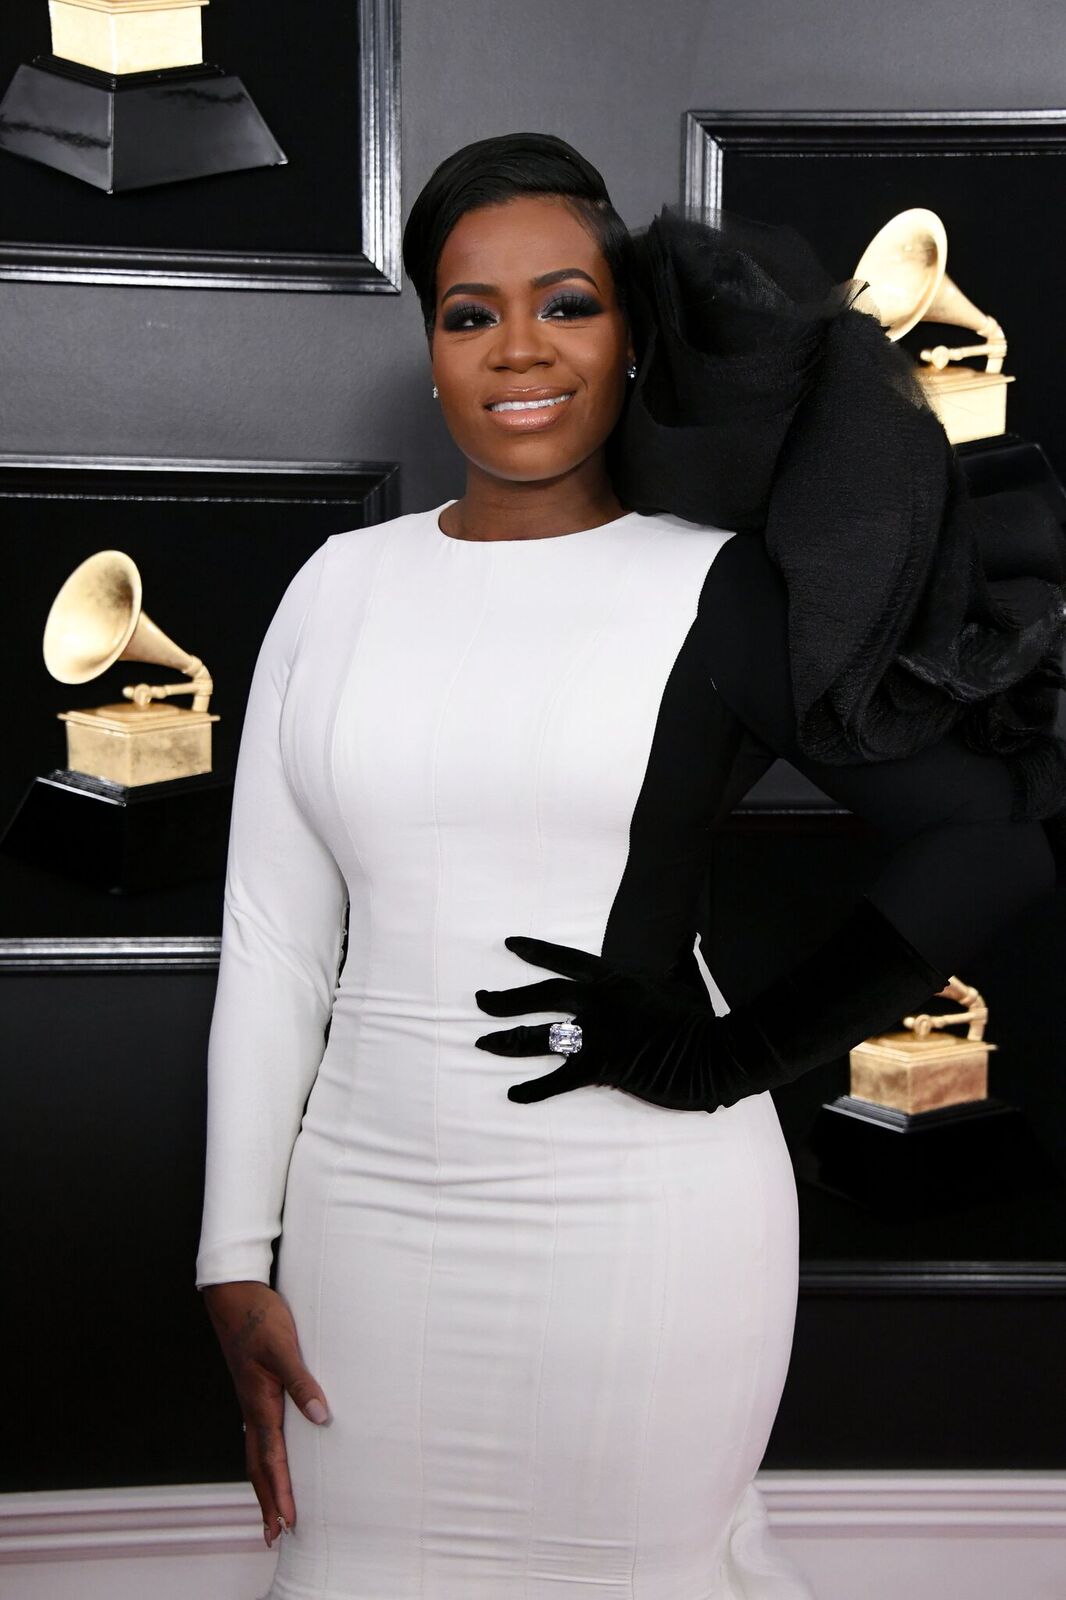 Fantasia Barrino at the 61st Annual GRAMMY Awards on February 10, 2019 | Photo: Getty Images